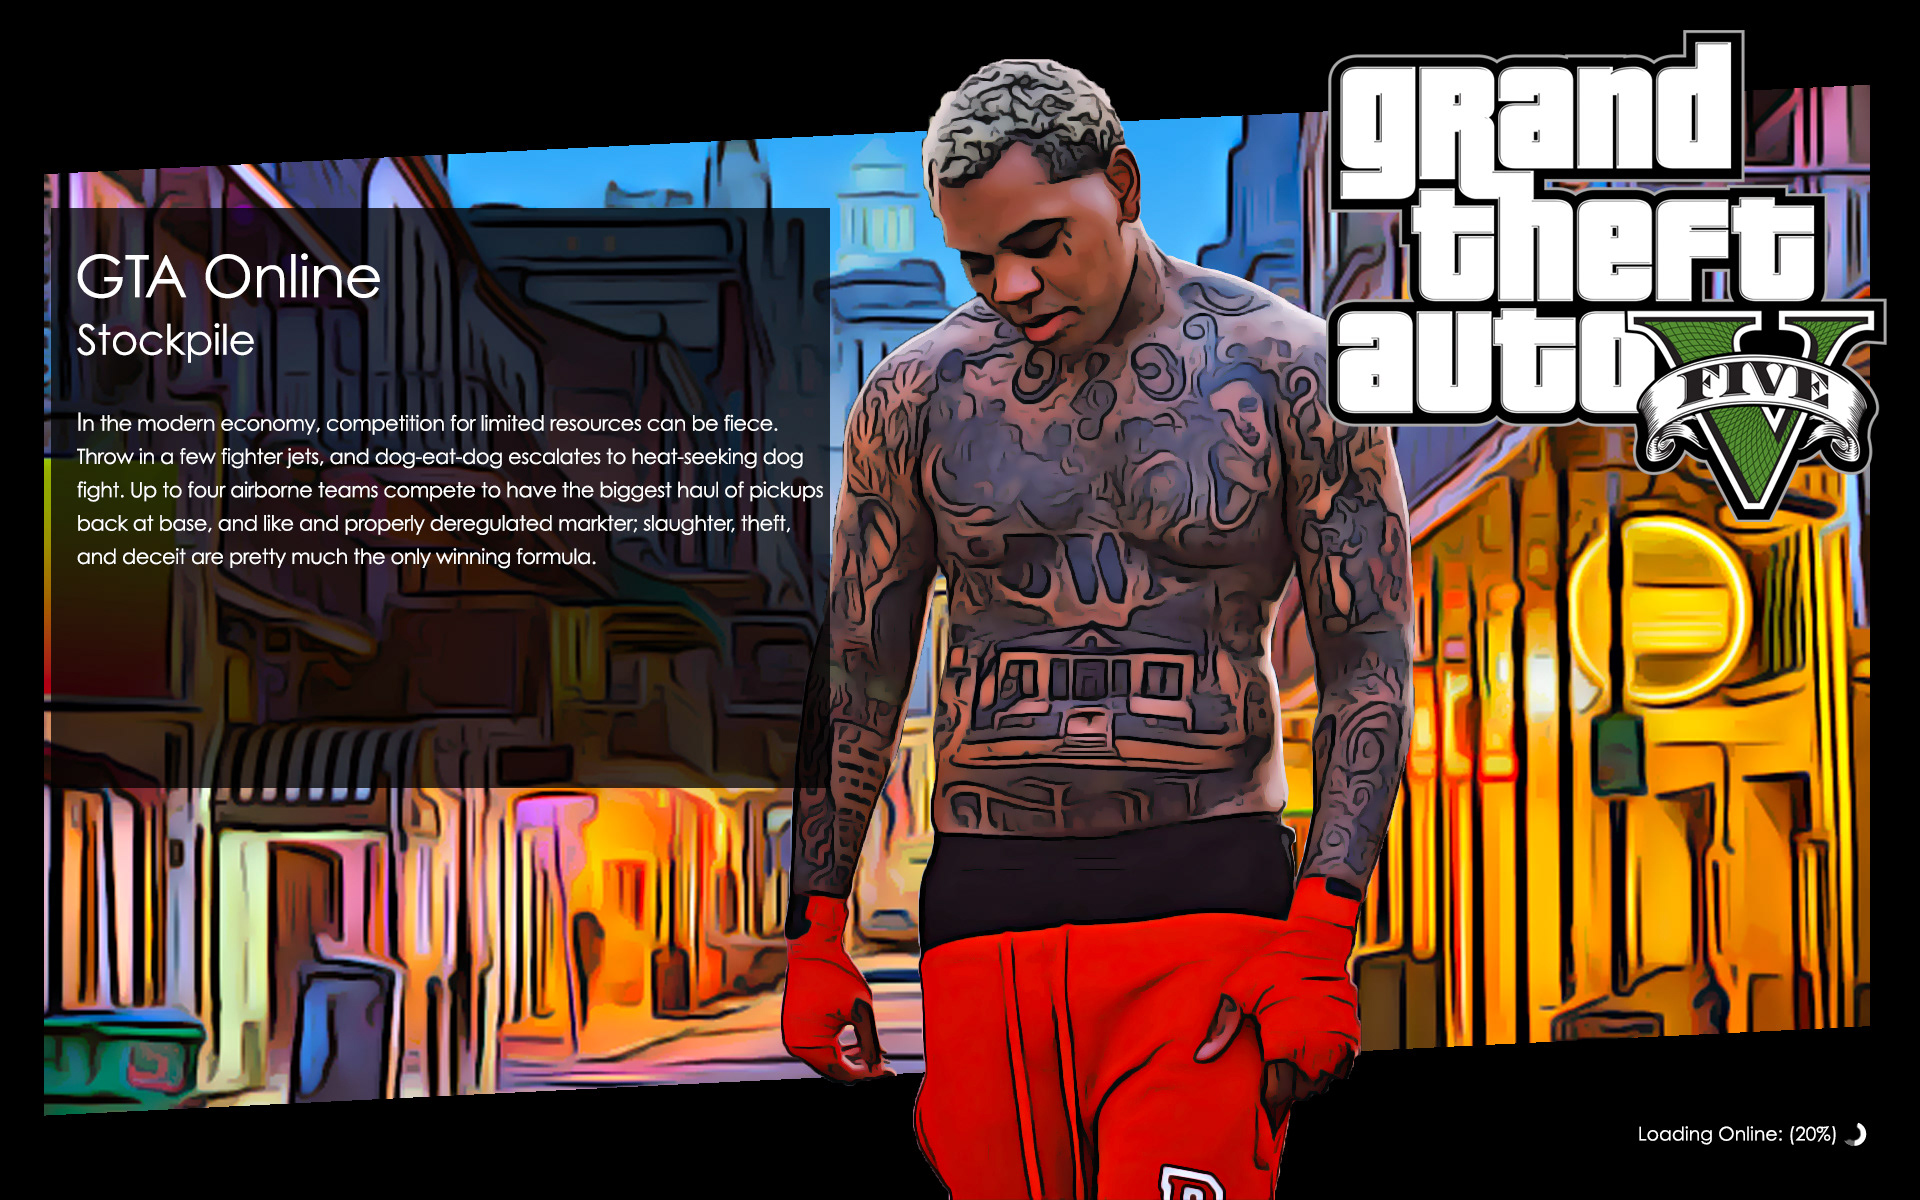 How To Make King Von's Outfits In Gta 5 Online